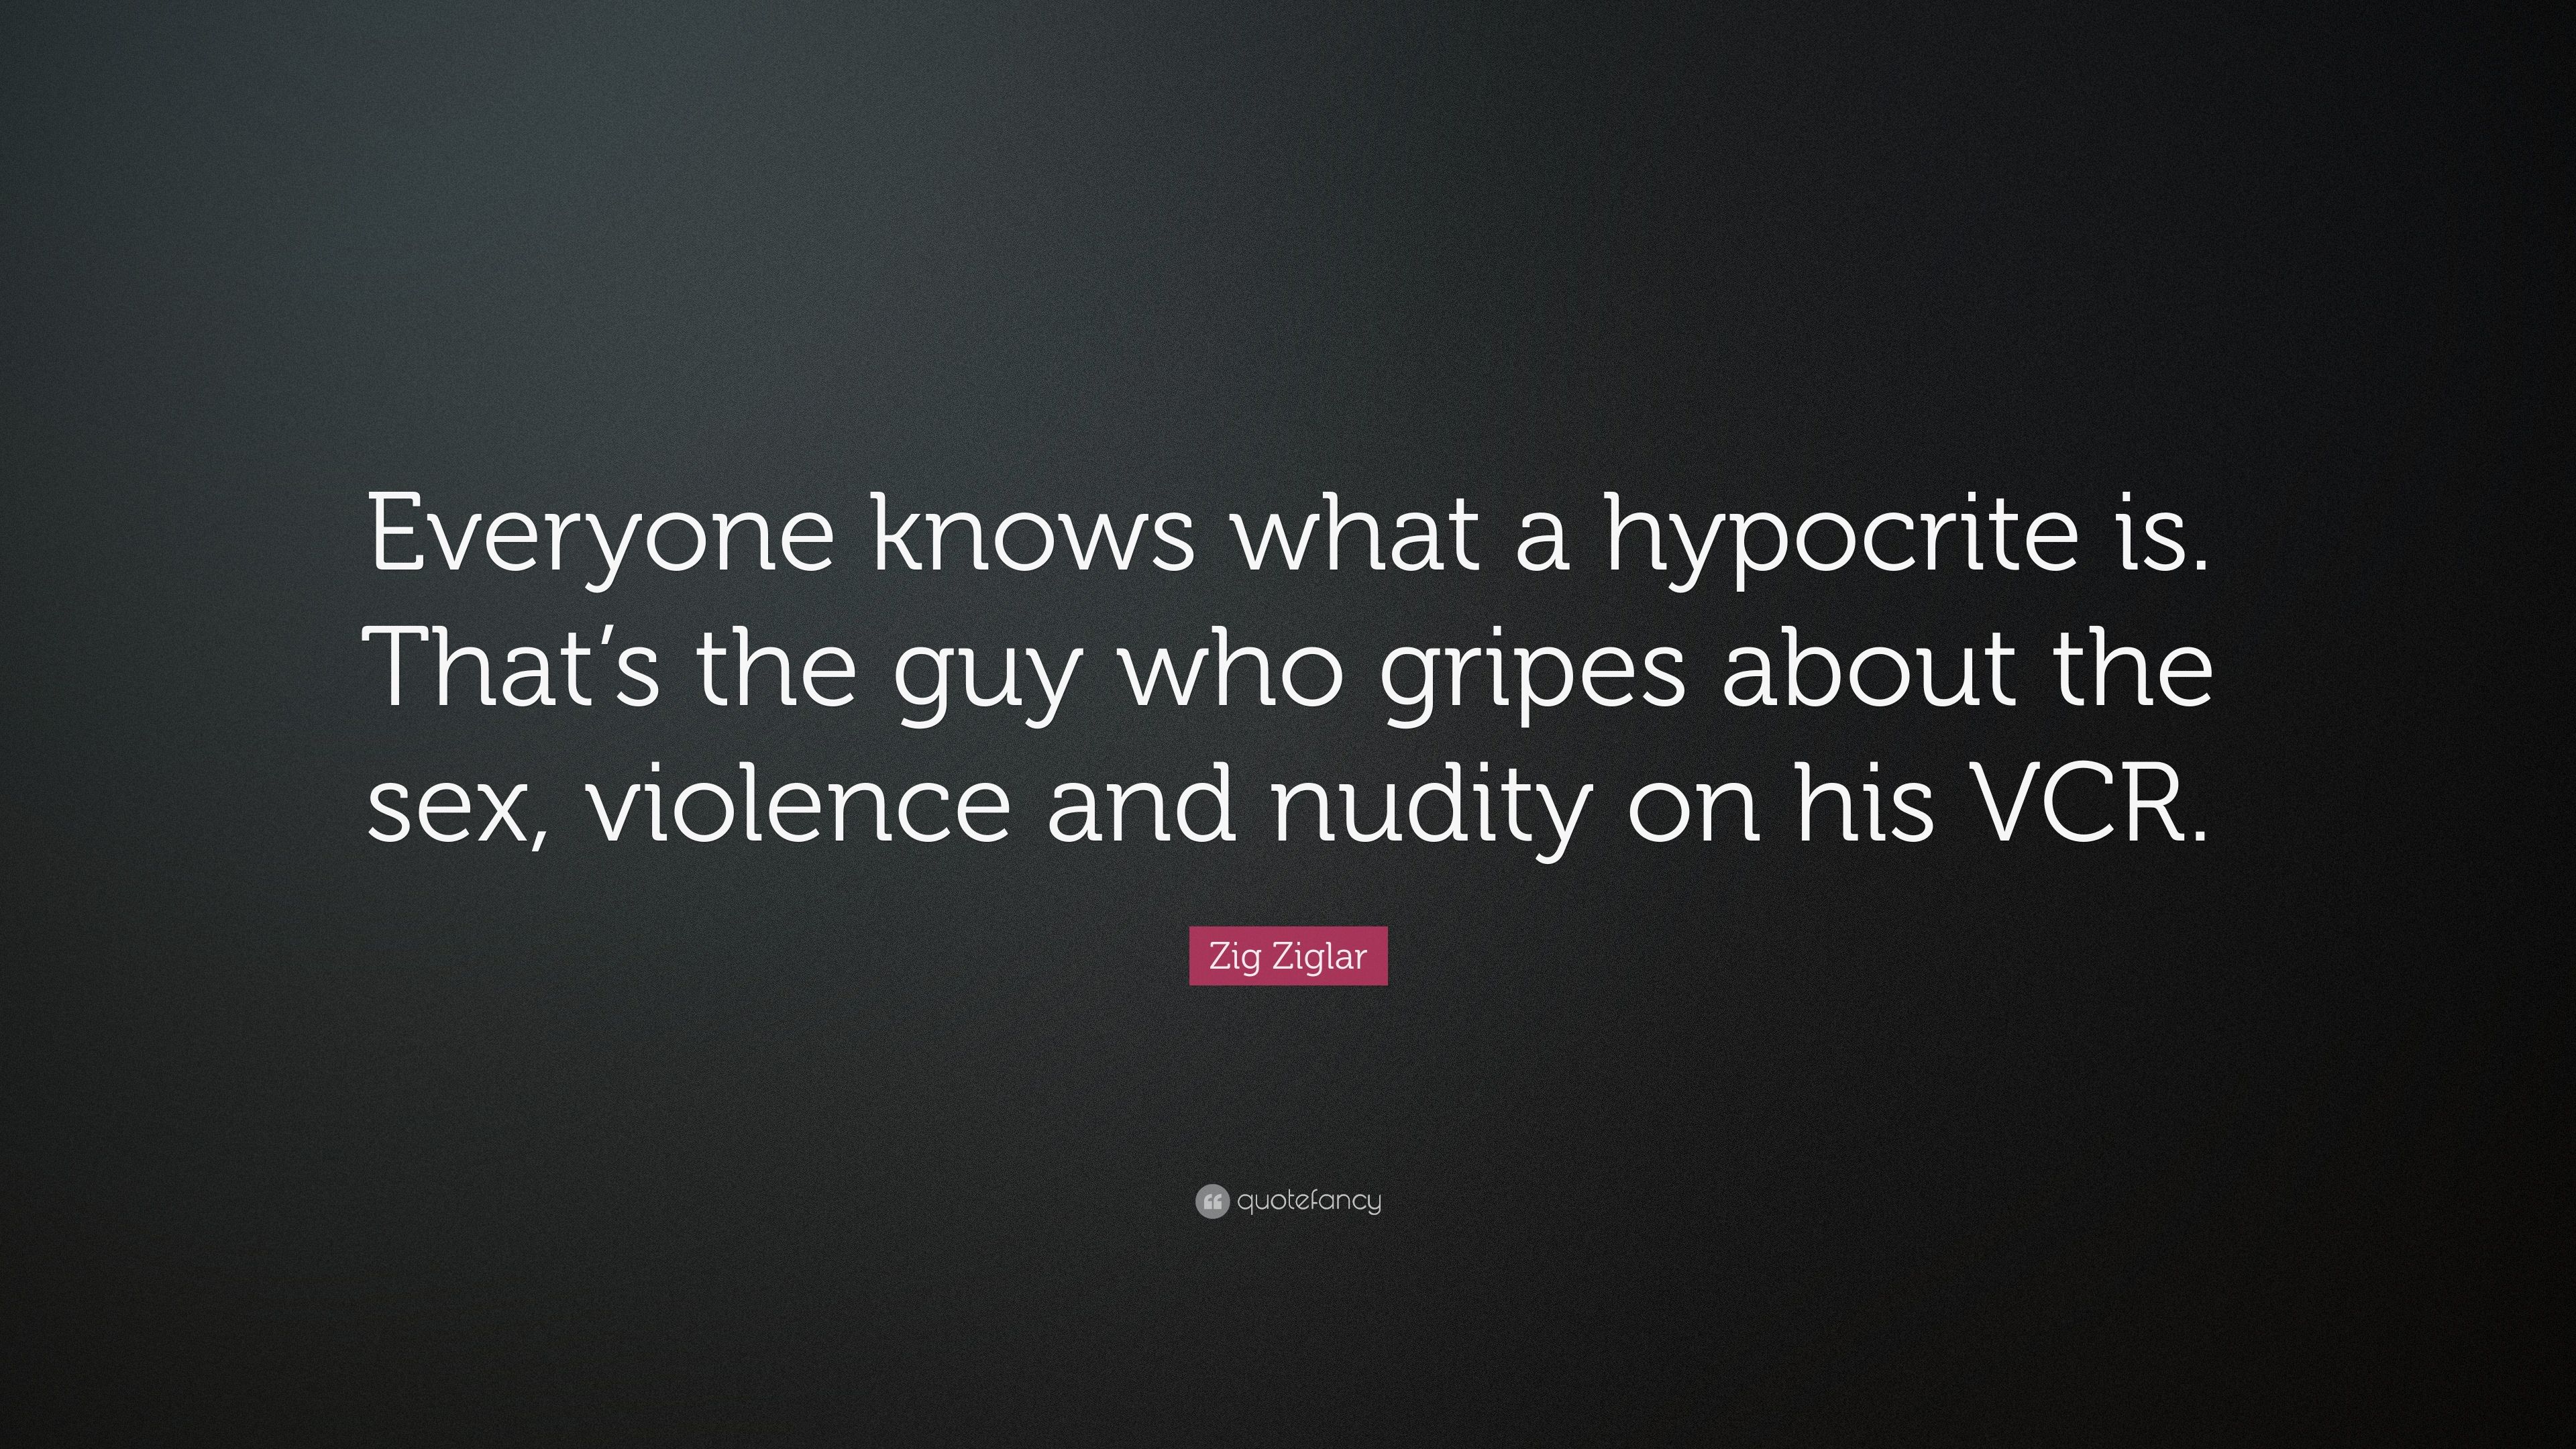 Zig Ziglar Quote: “Everyone knows what a hypocrite is. That's